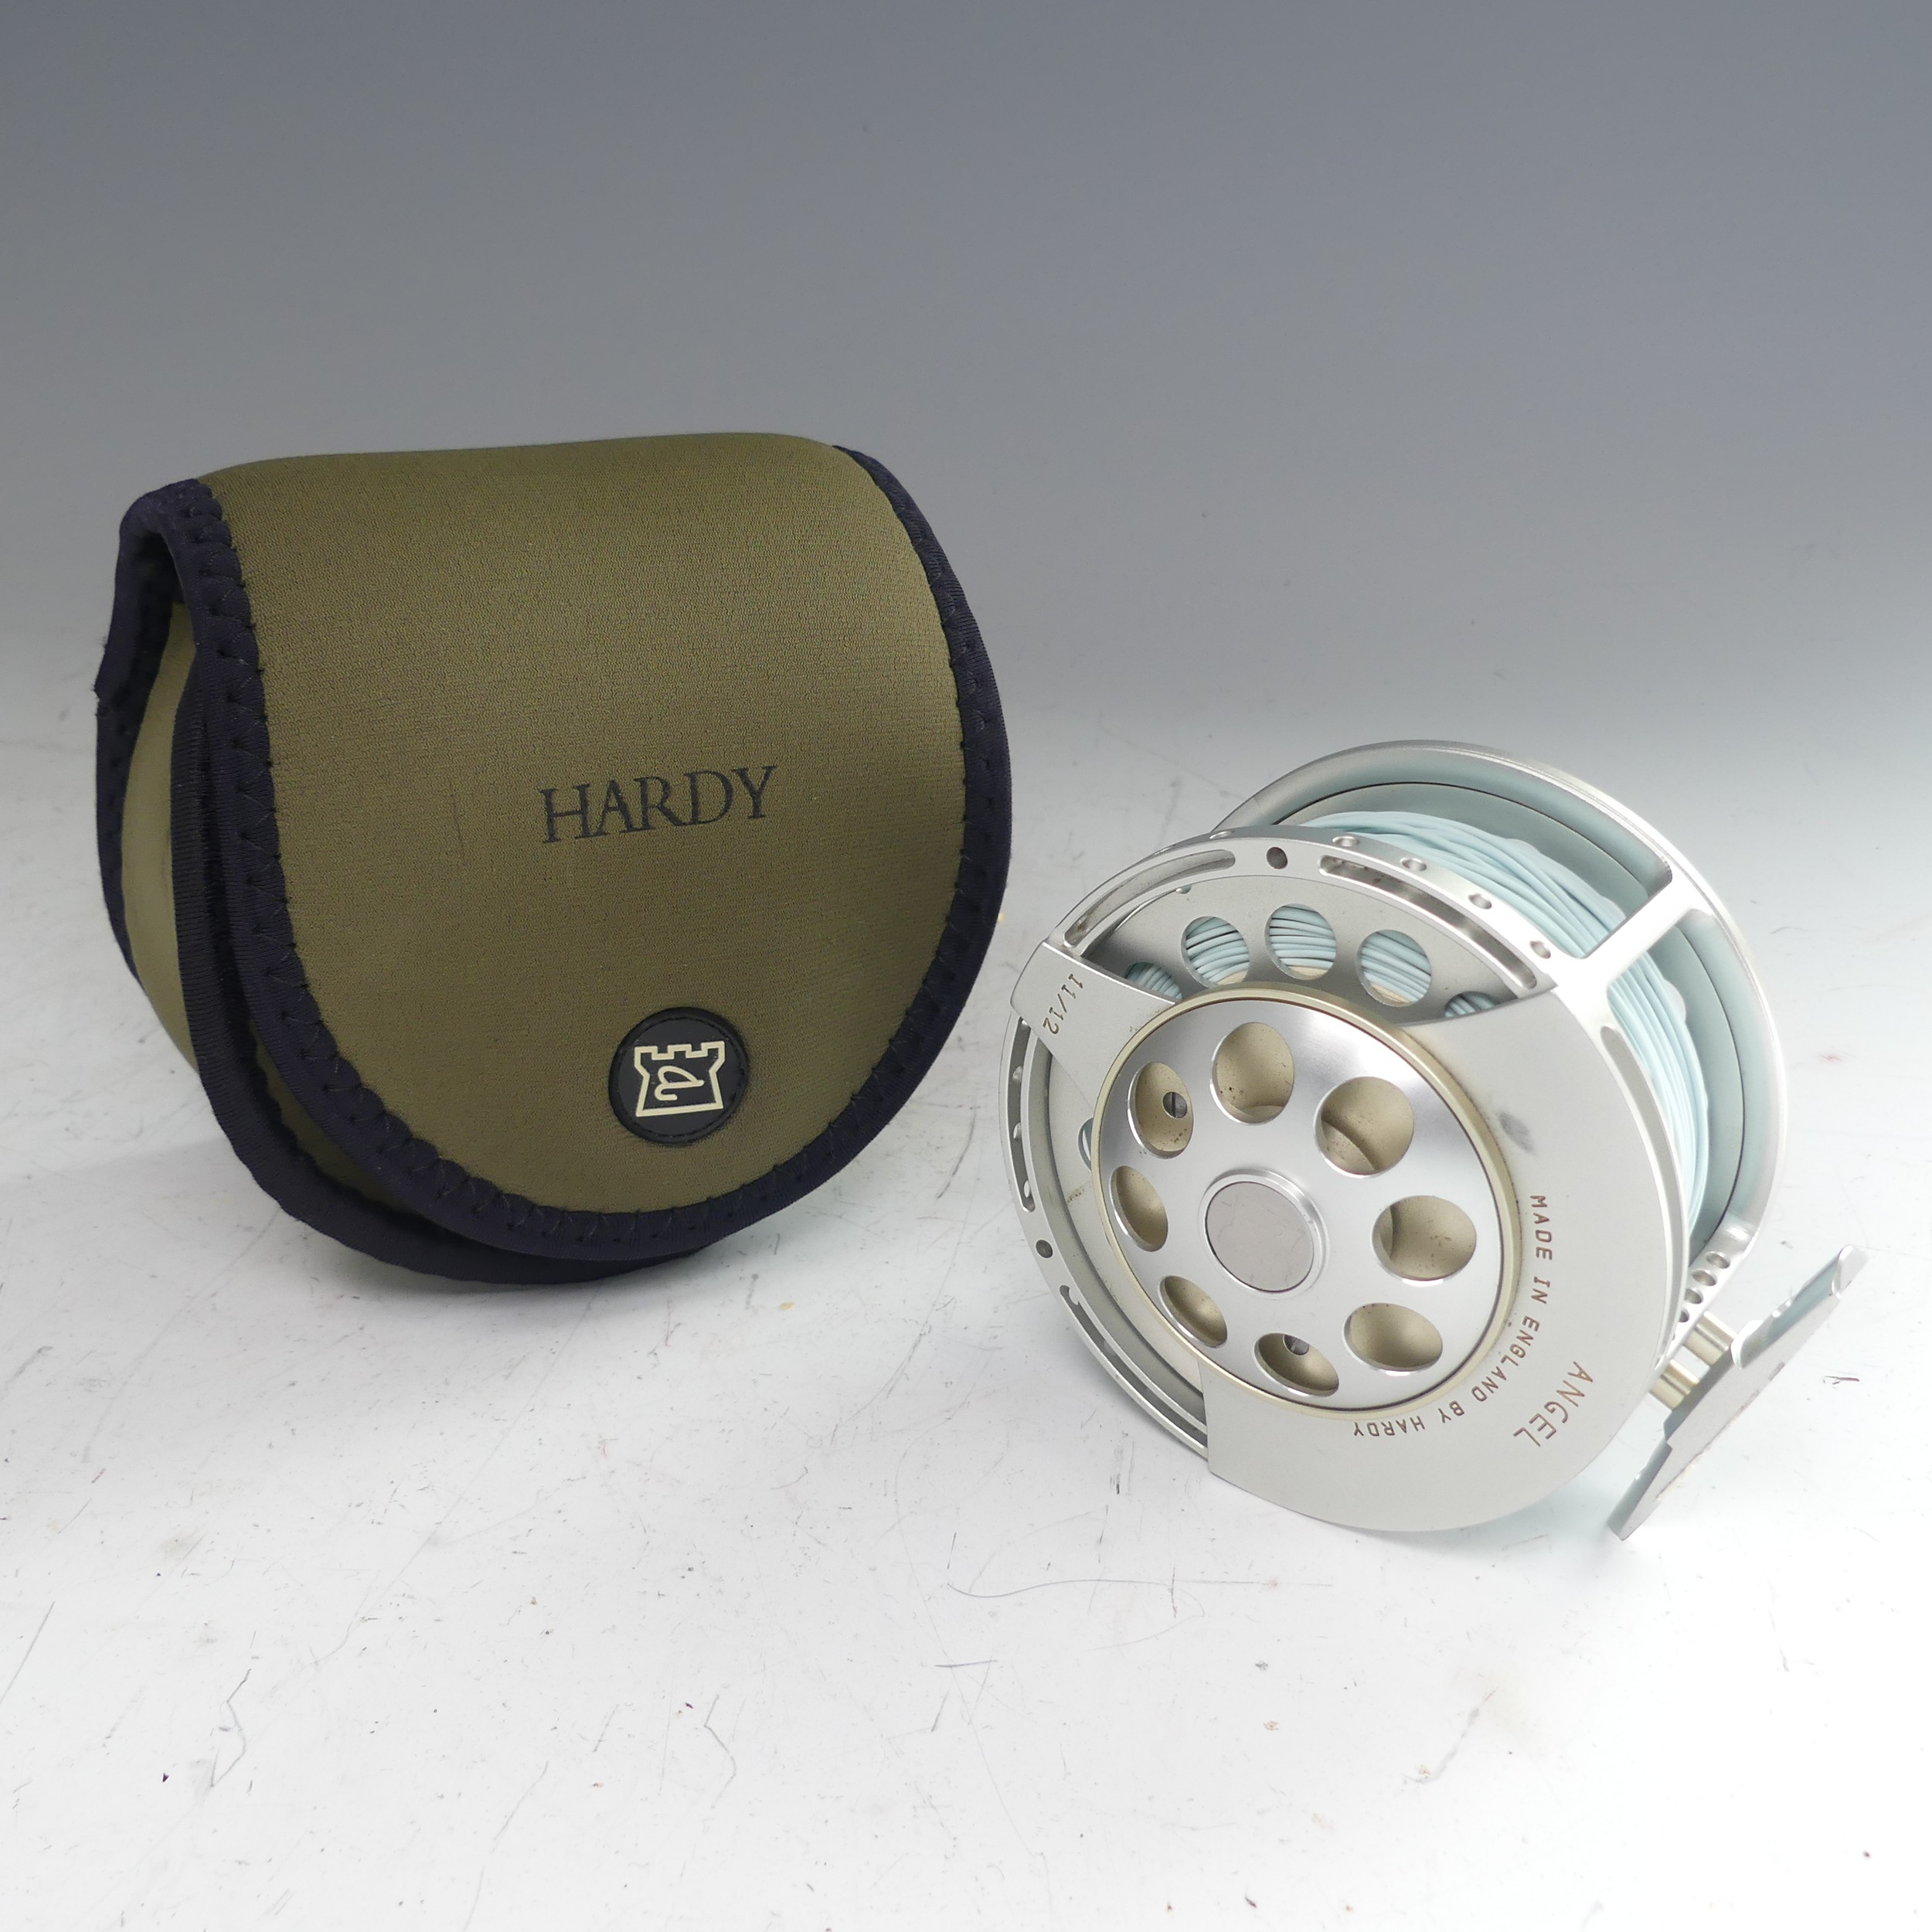 A Hardy Angel 11/12 fishing Reel, no. A26697, with Hardy pouch, 11.5cm diameter.